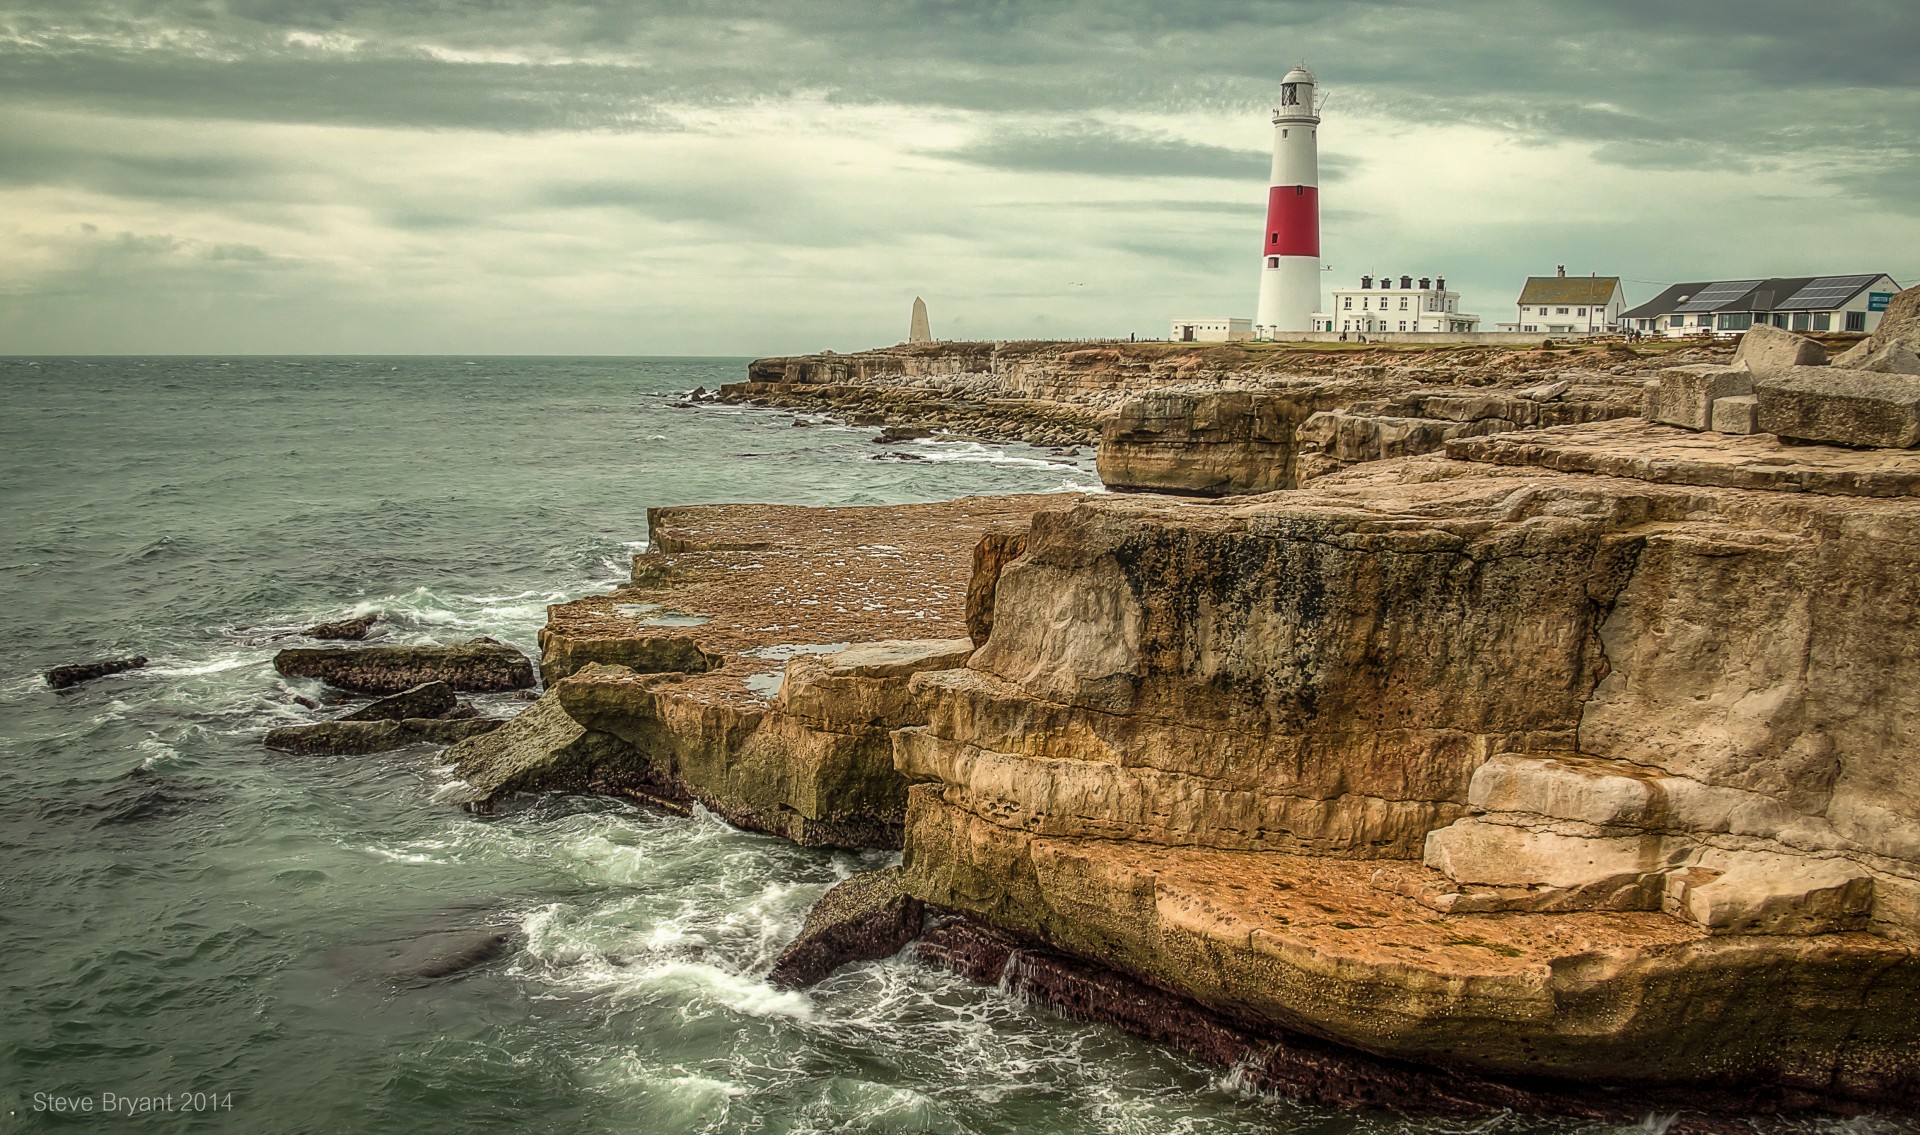 Portland Bill Light House on the Dorset coast in the south of England